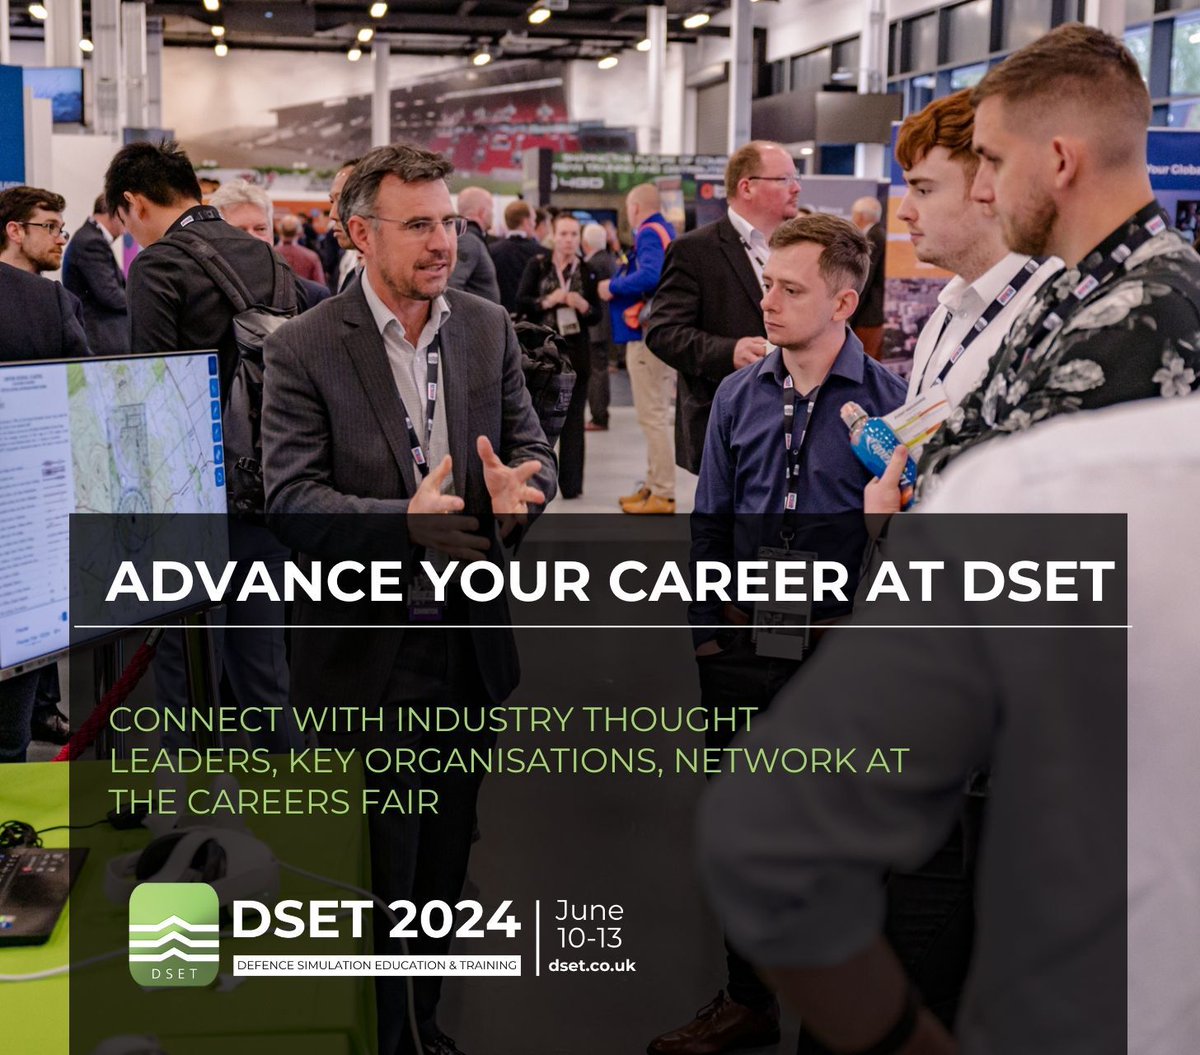 Network in-person and virtually across the collaborative event and attend the DSET careers fair to advance your career at DSET. Register today at buff.ly/3SpFgCe DSET is FREE to attend for Military, Government and Academia. #MilitaryTraining #MilitarySimulation